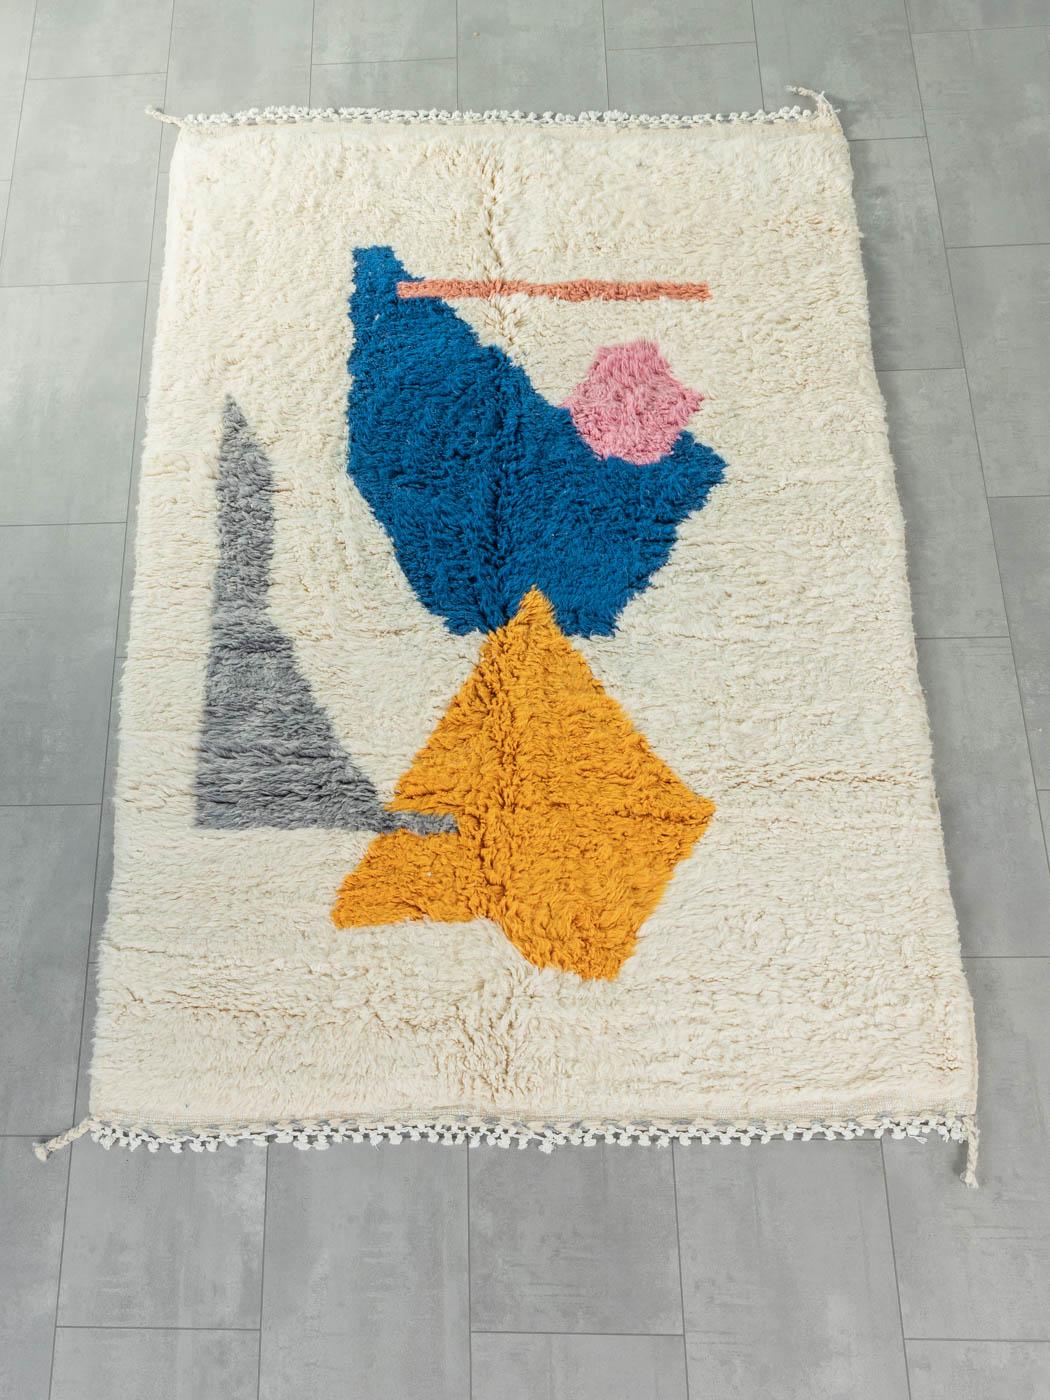 Equilibrium is a contemporary 100% wool rug – thick and soft, comfortable underfoot. Our Berber rugs are handwoven and handknotted by Amazigh women in the Atlas Mountains. These communities have been crafting rugs for thousands of years. One knot at